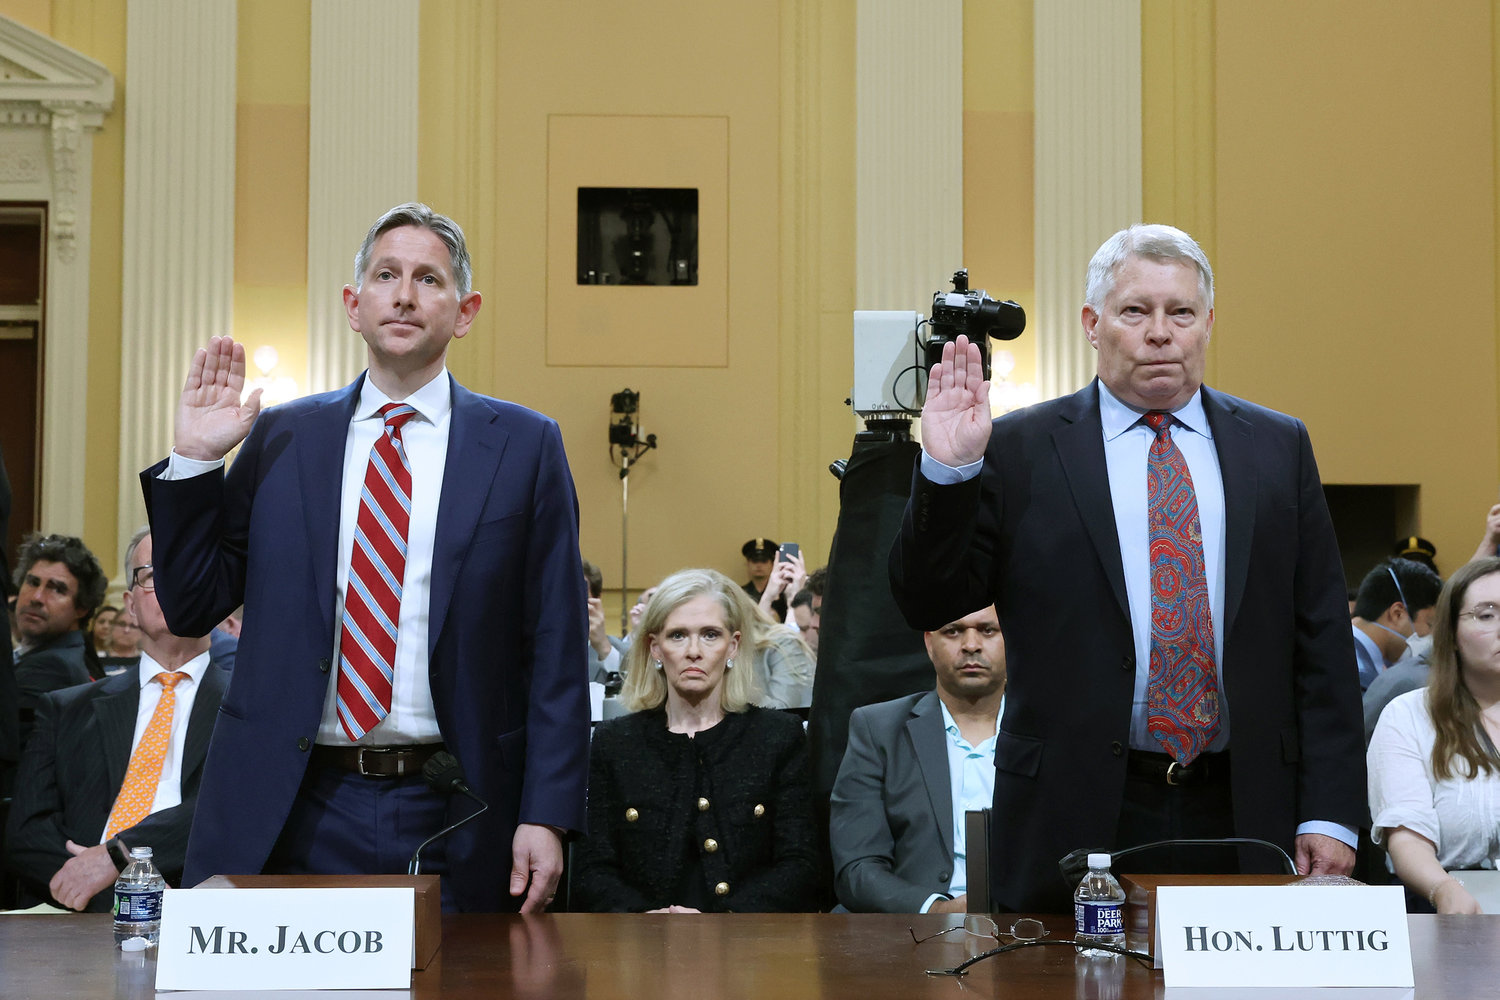 Greg Jacob, former counsel to Vice President Mike Pence, and J. Michael Luttig, retired judge for the U.S. Court of Appeals for the Fourth Circuit and informal advisor to Mike Pence, are sworn in to testify before the House Select Committee to Investigate the January 6th Attack on the U.S. Capitol in the Cannon House Office Building on June 16, 2022 in Washington, D.C. (Drew Angerer/Getty Images/TNS)